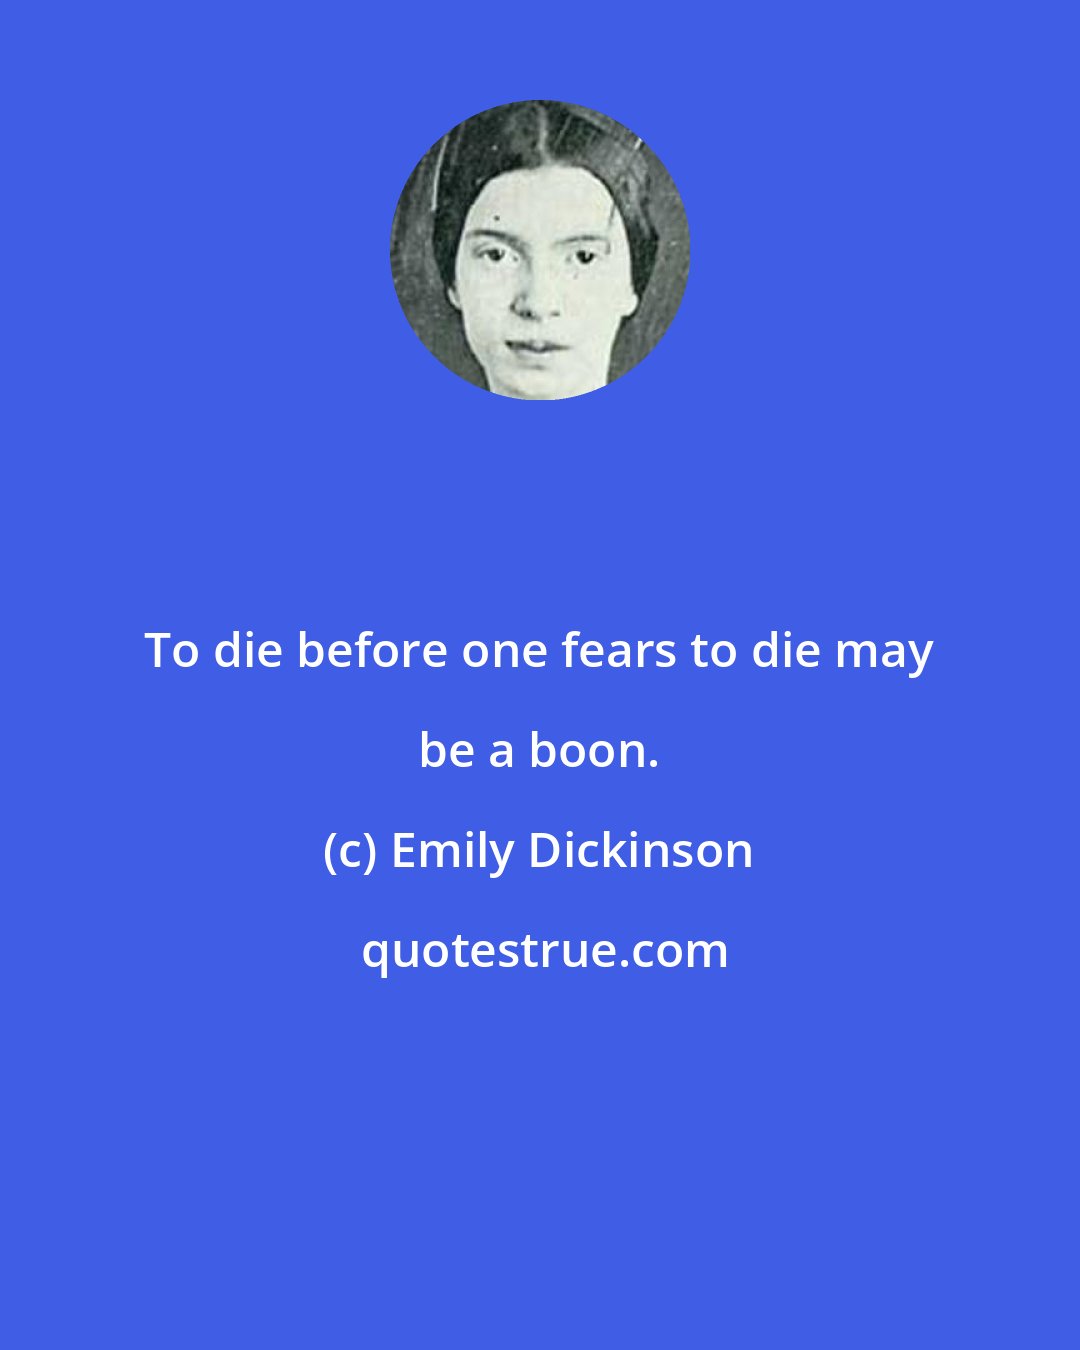 Emily Dickinson: To die before one fears to die may be a boon.